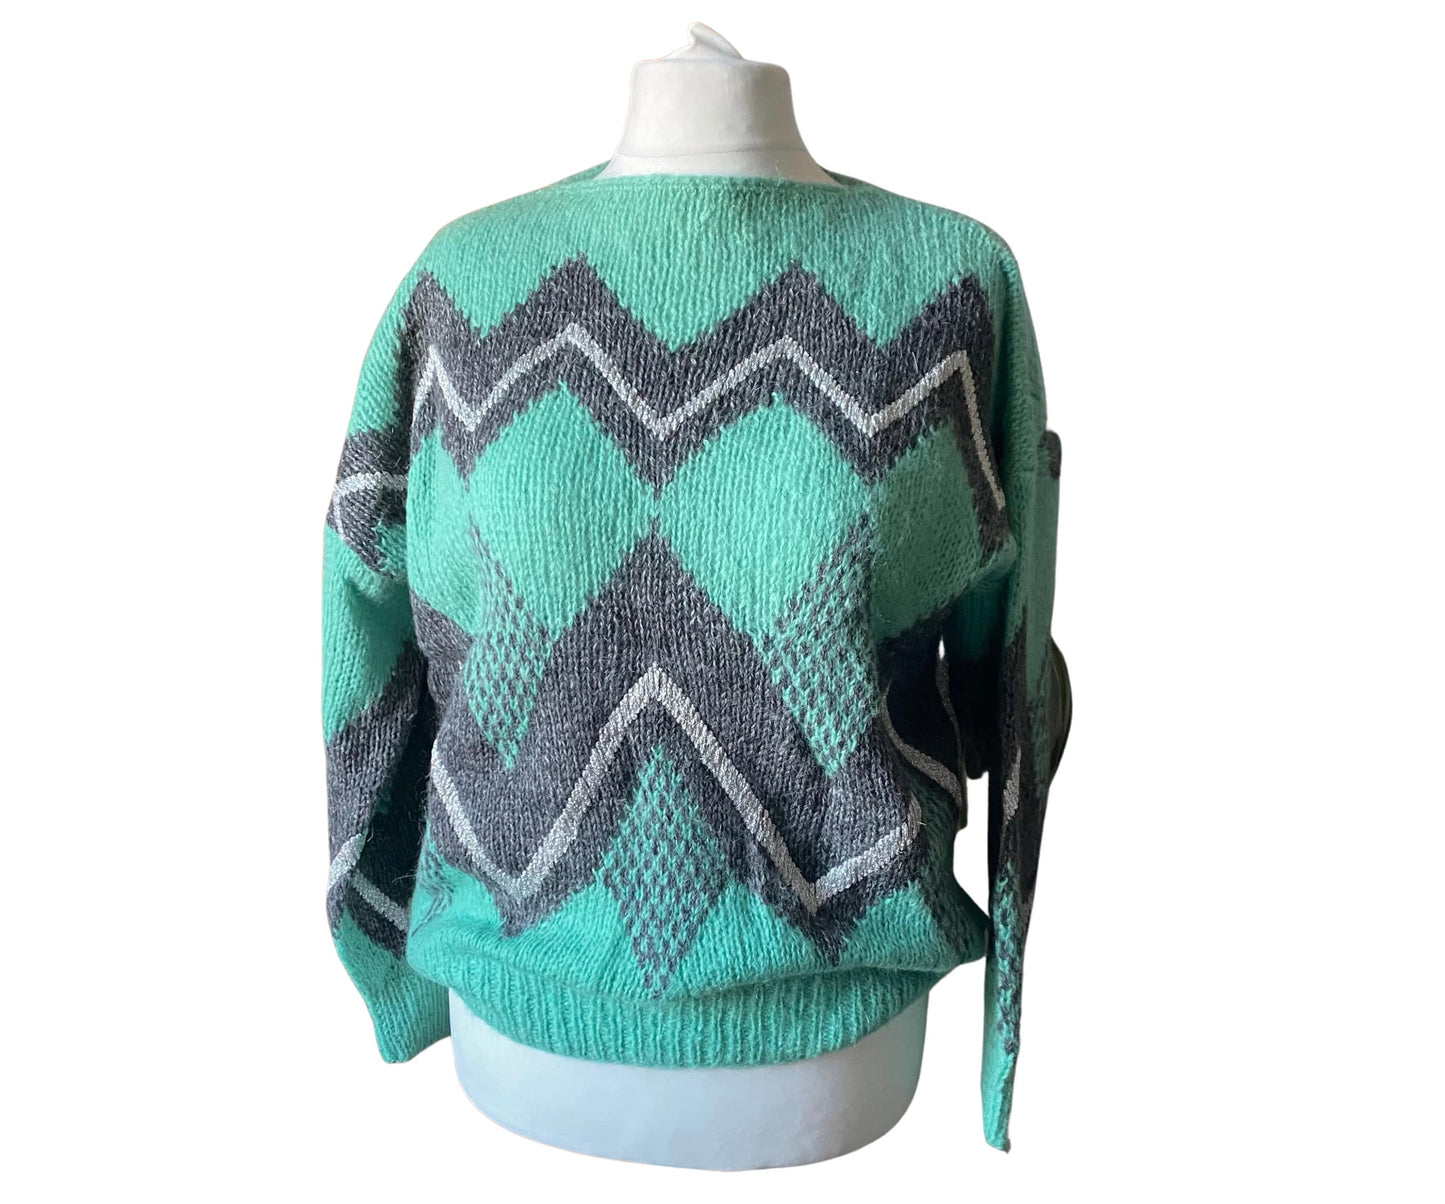 Mint green fluffy 80s jumper with grey and silver zig zag pattern.